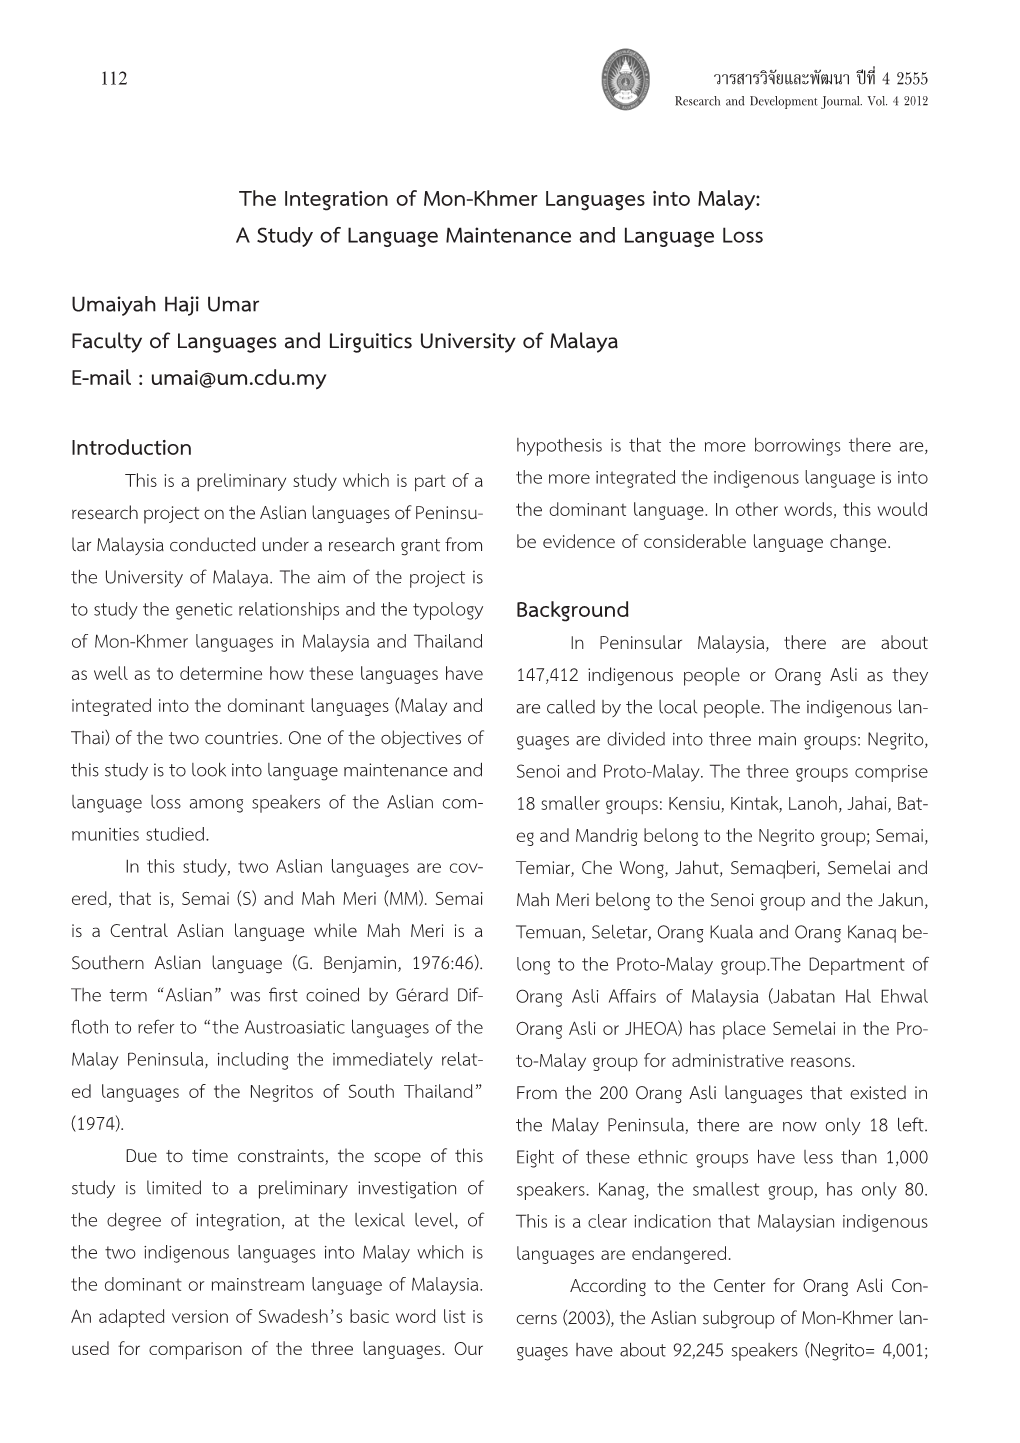 The Integration of Mon-Khmer Languages Into Malay: a Study of Language Maintenance and Language Loss